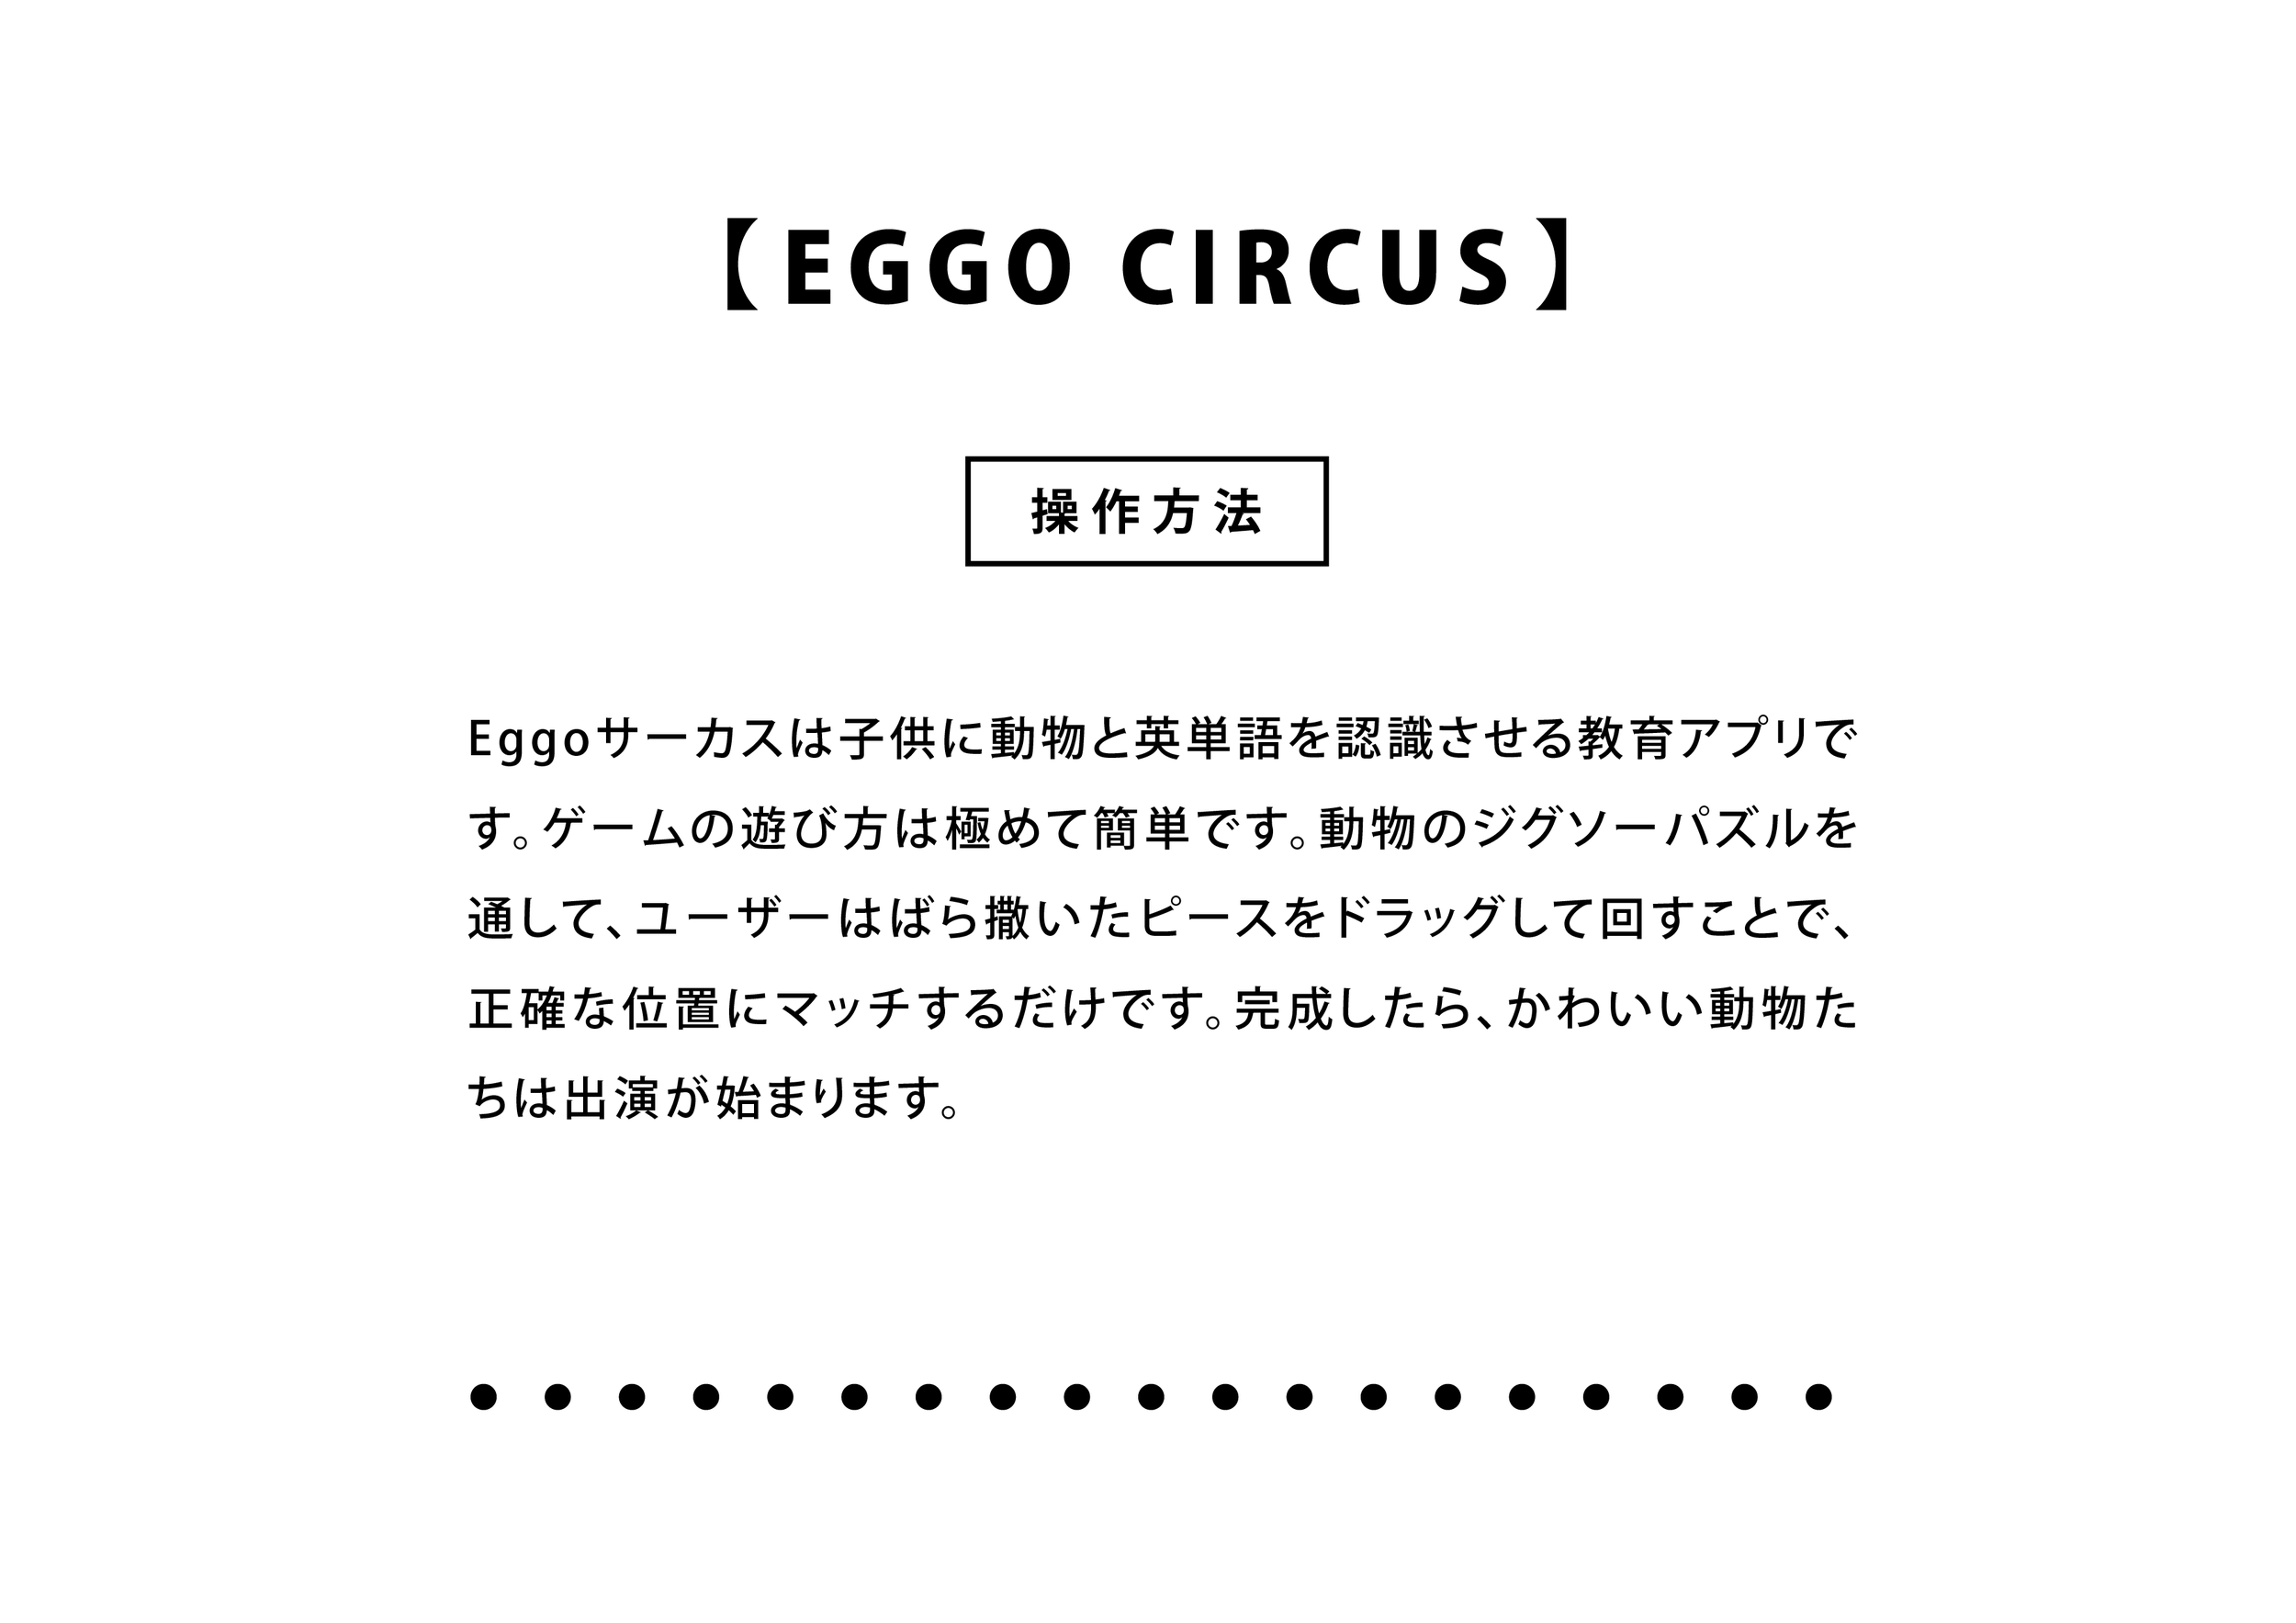 Promotion Kits_Circus-07.png